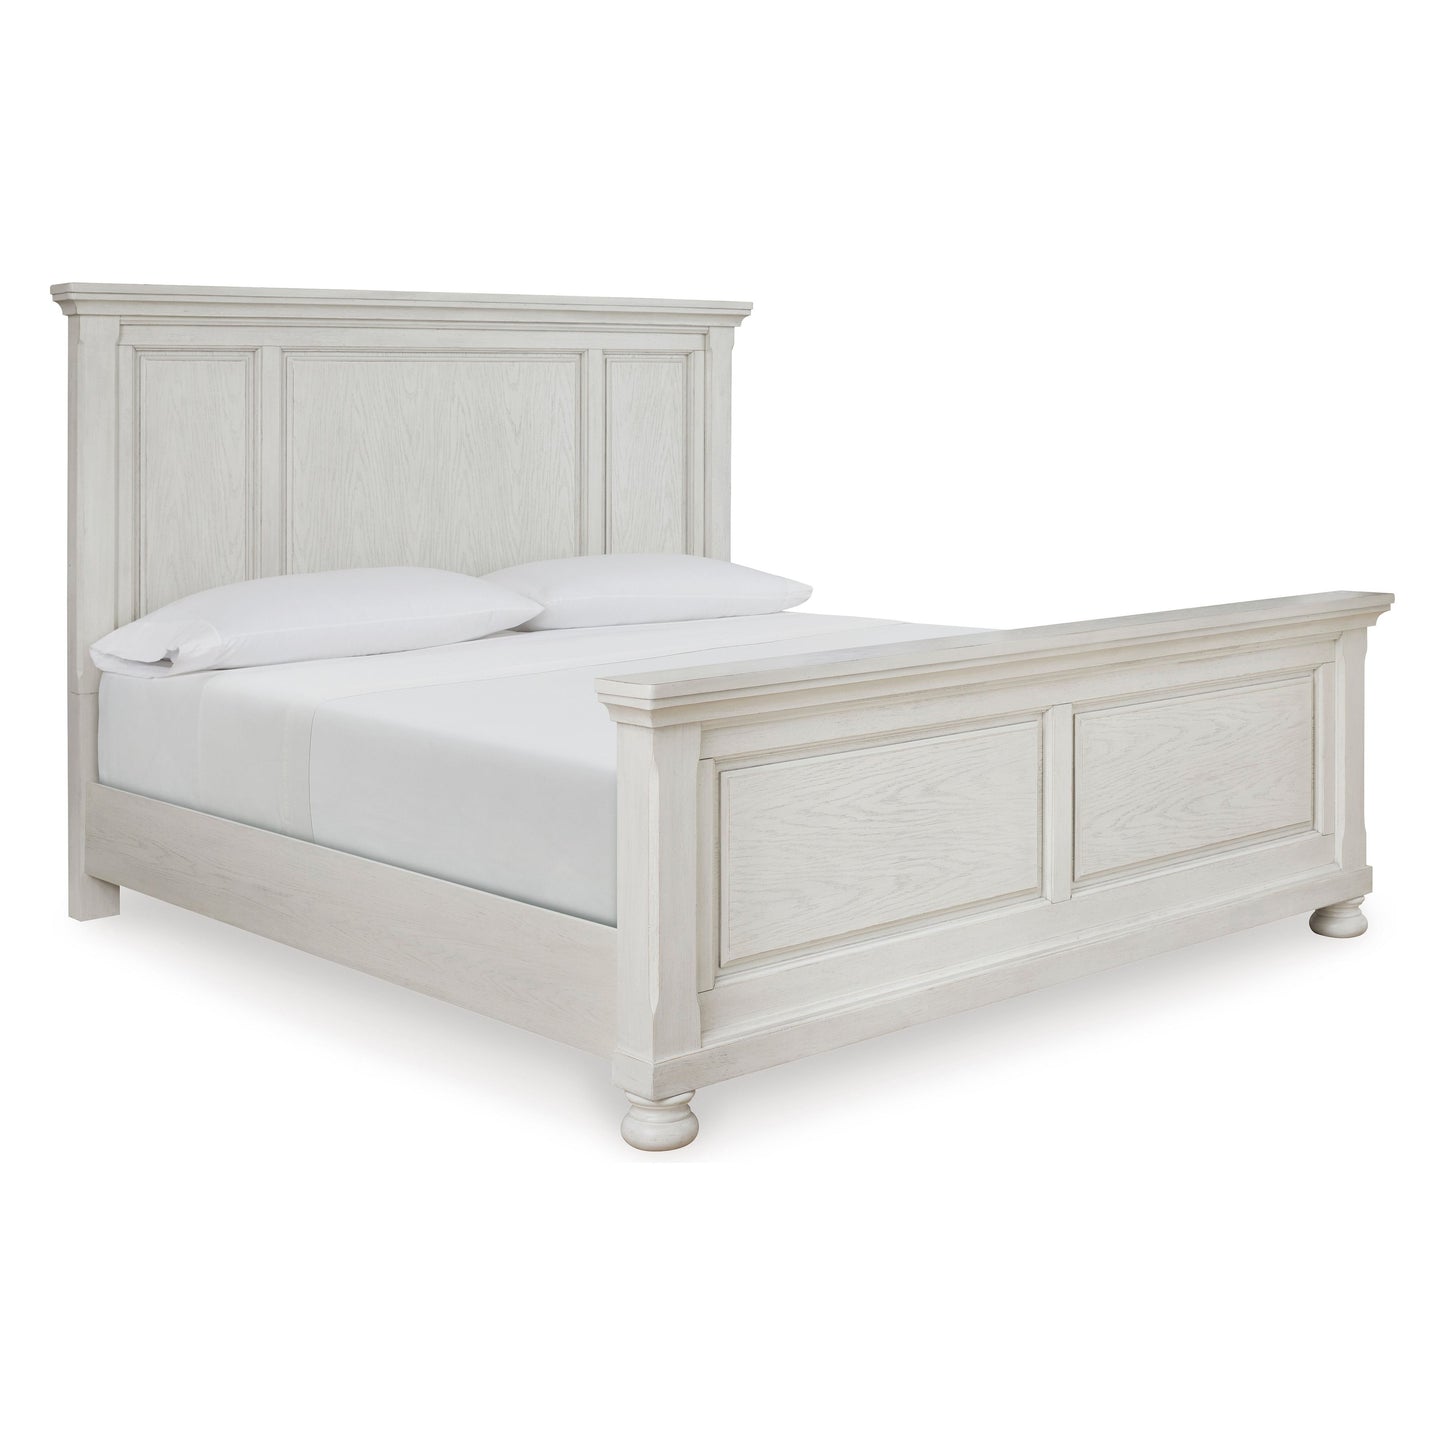 ROBBINSDALE PANEL BED - ANTIQUE WHITE